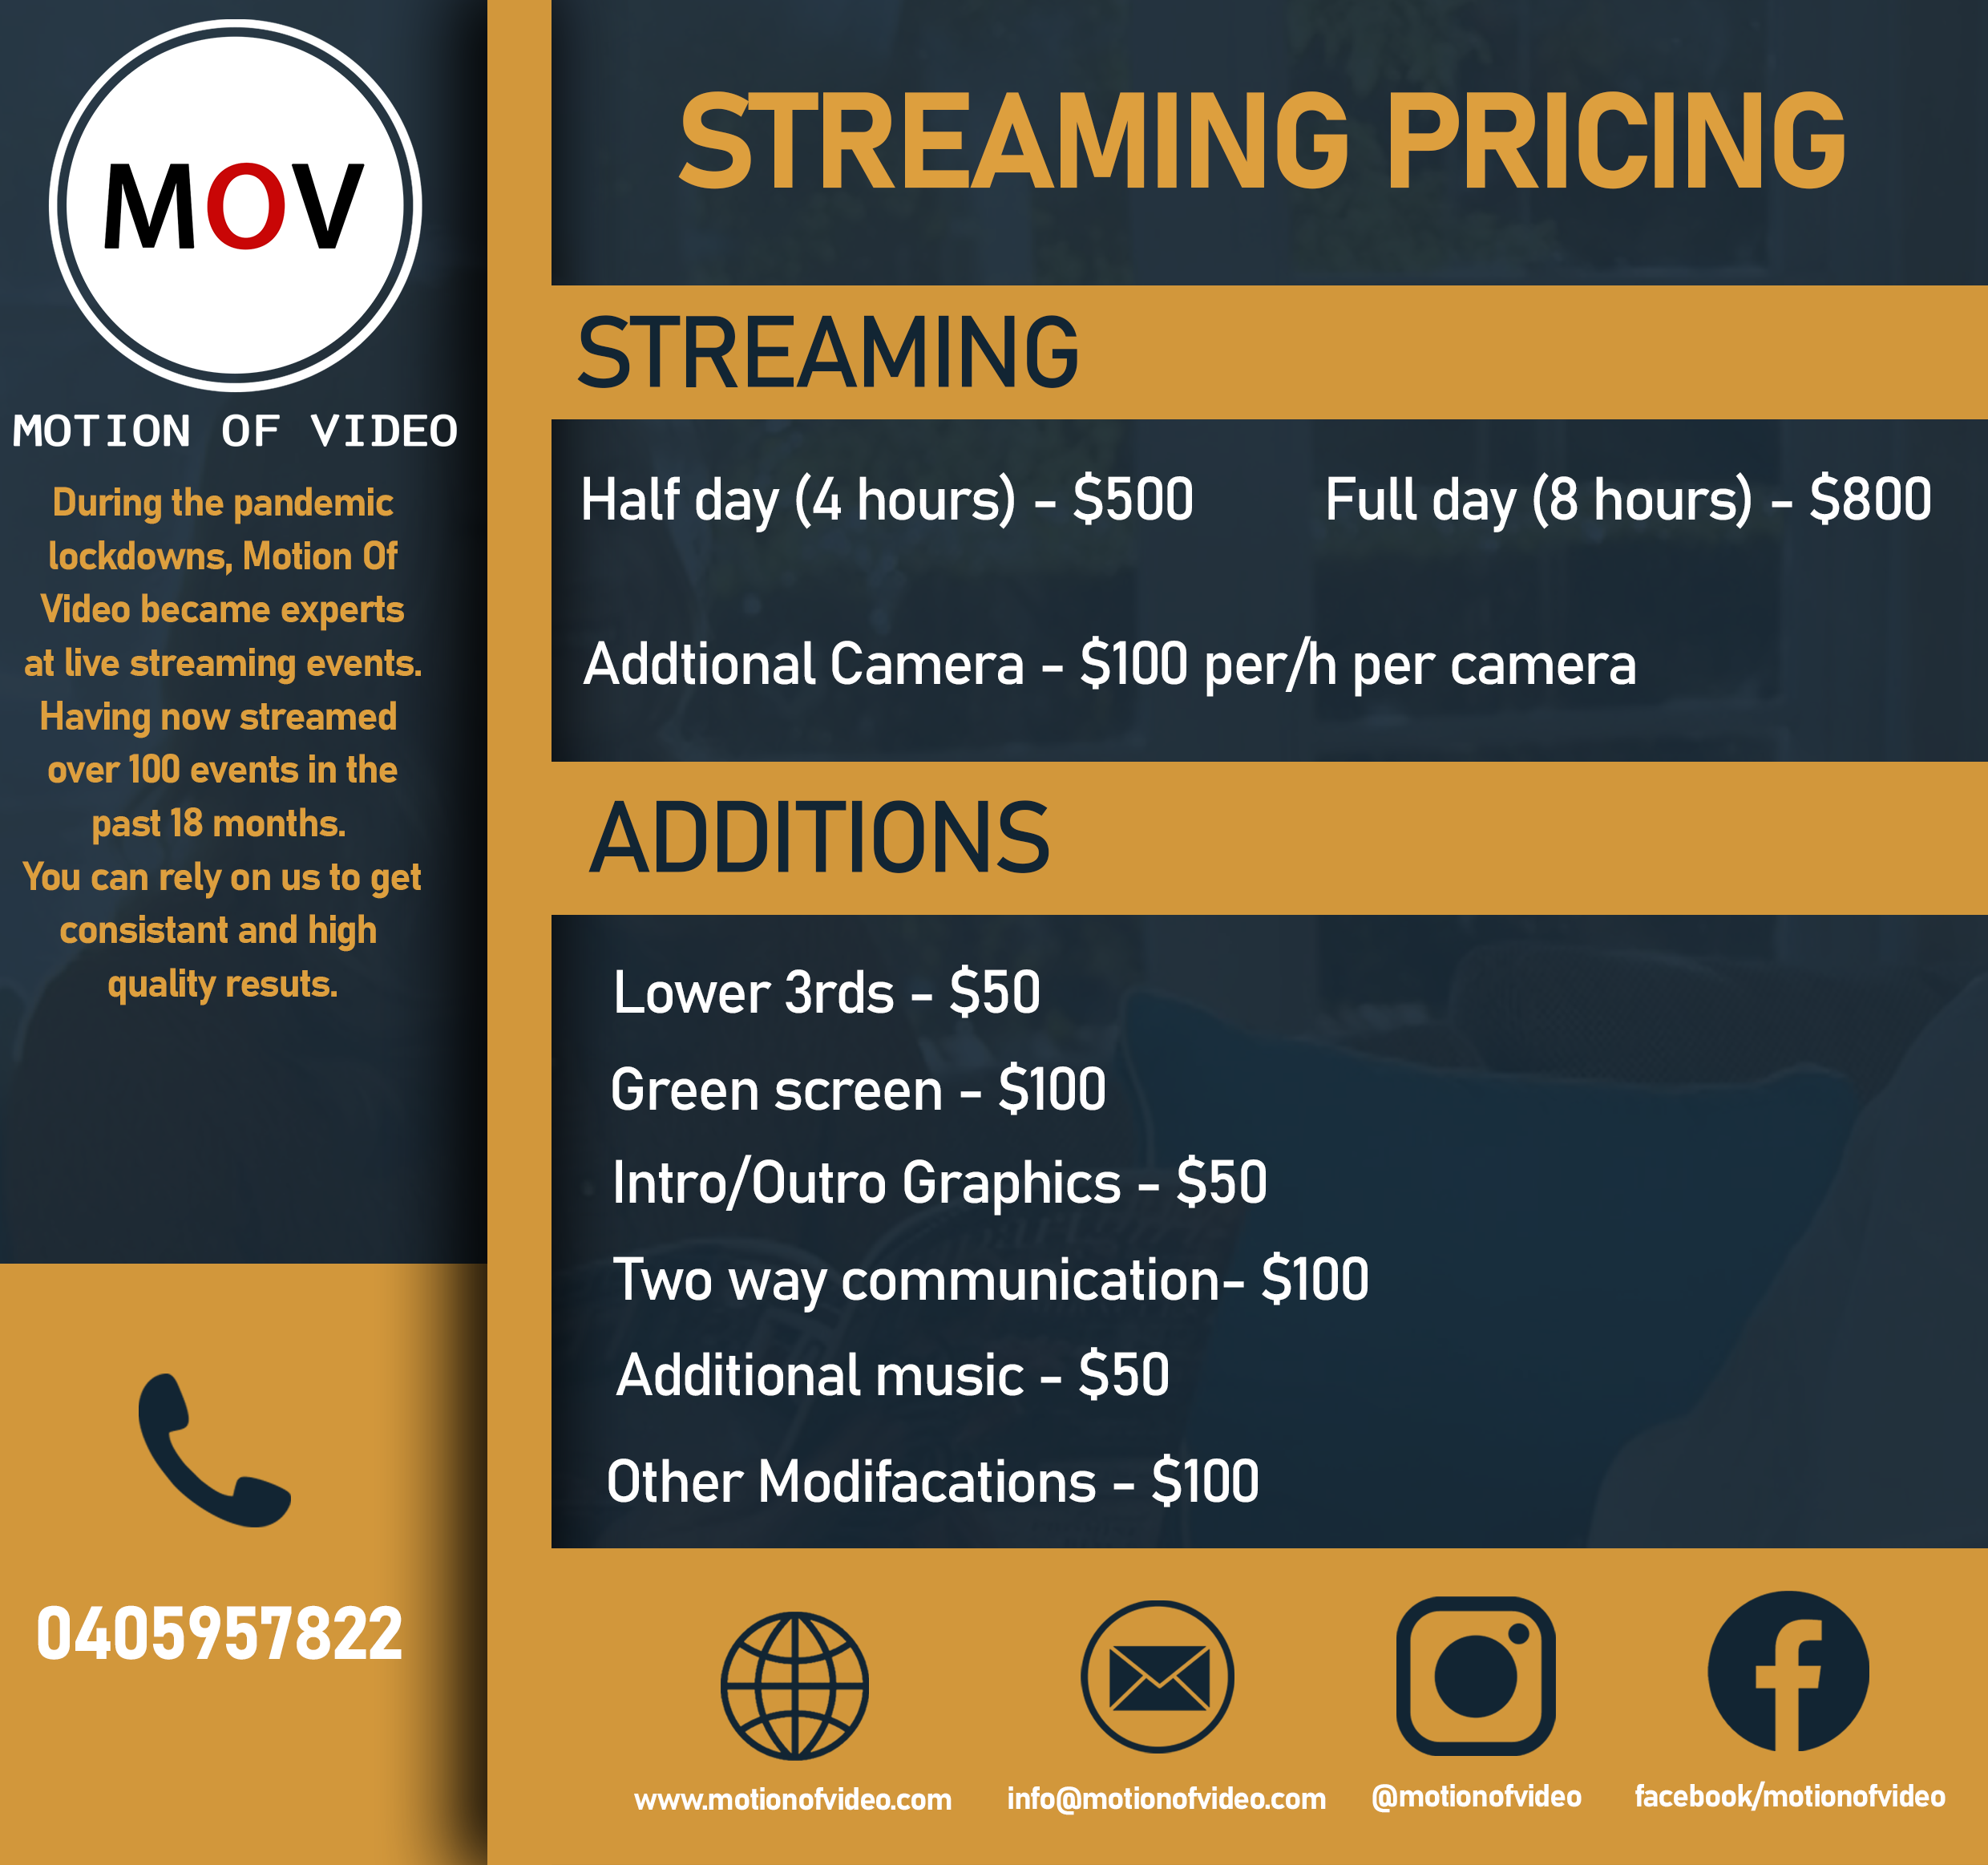 Weddings — MOTION OF VIDEO 0466412001 info@motionofvideo